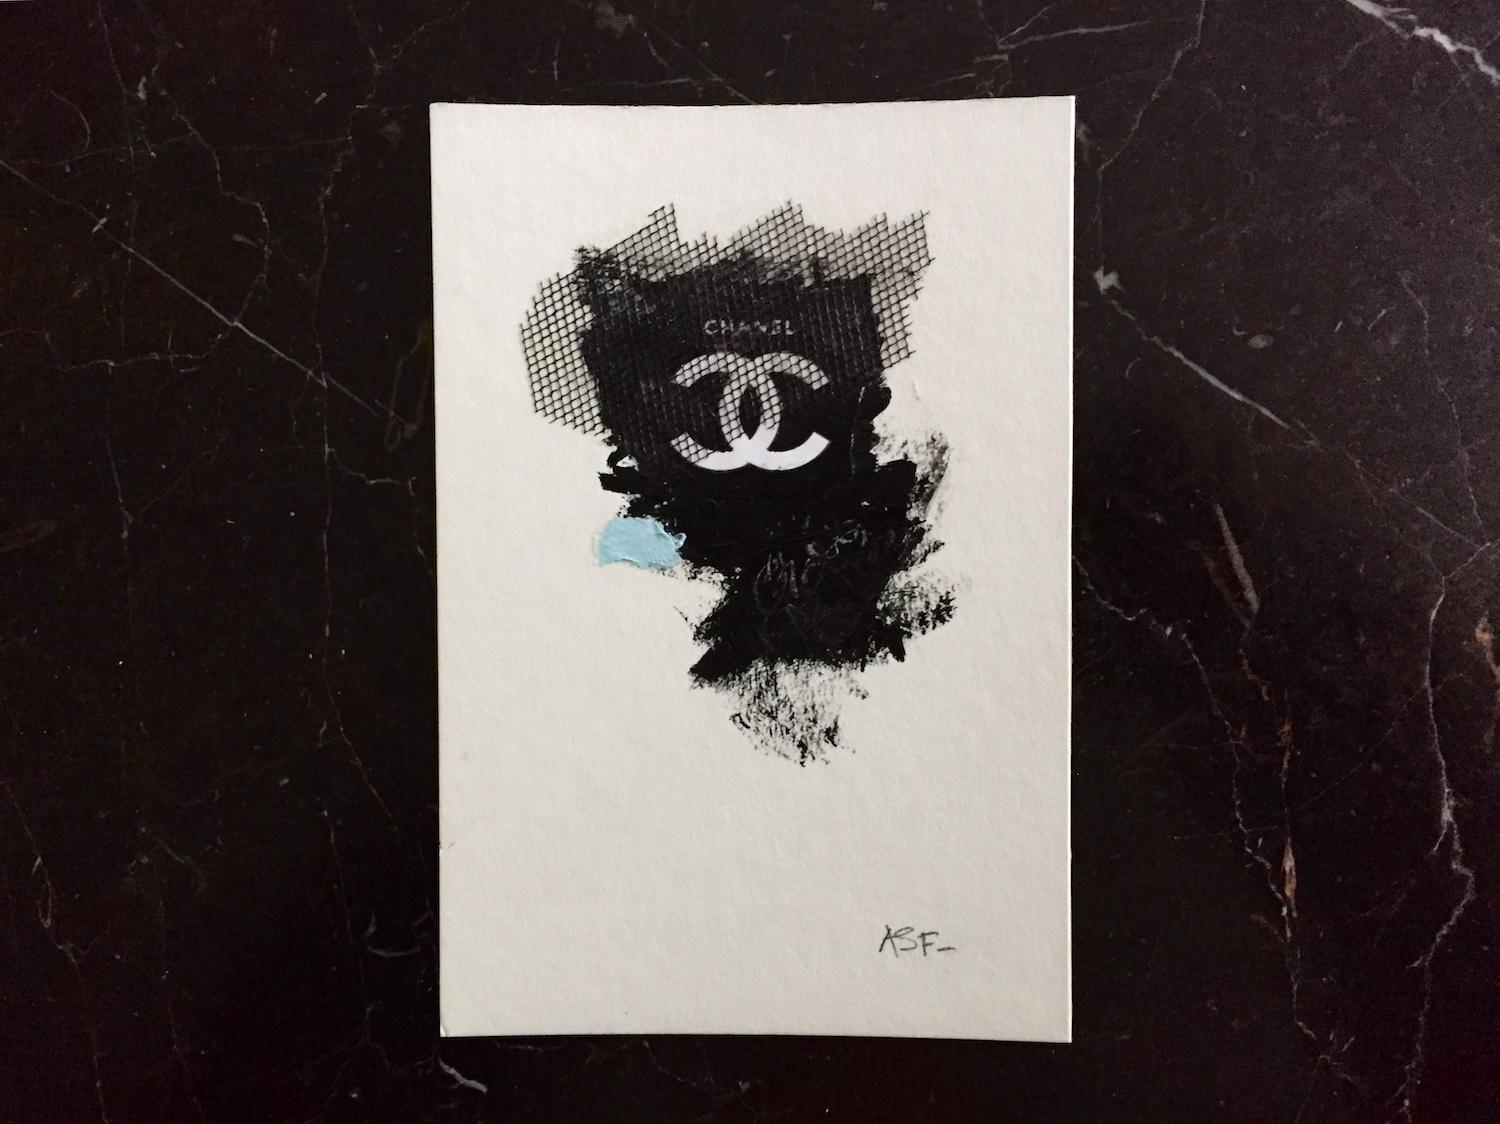 Andrea Stajan-Ferkul Still-Life Painting - Homage to Chanel - (4" x 5.8", Black And White, Chanel Art)